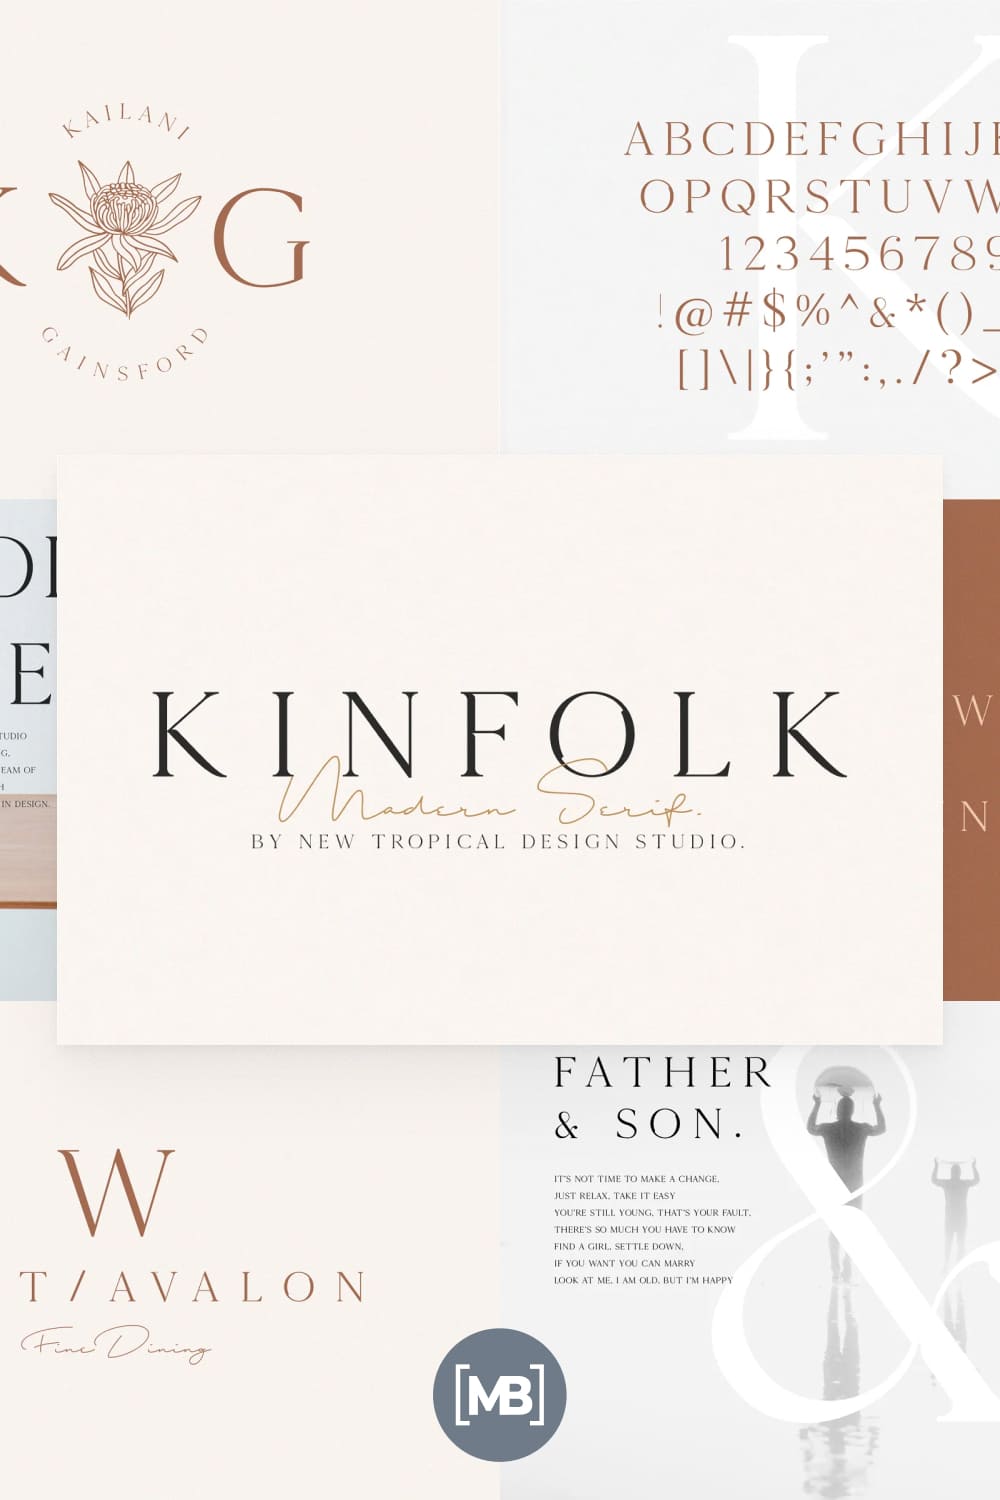 Slim and elegant font. It is perfect for vogue style.